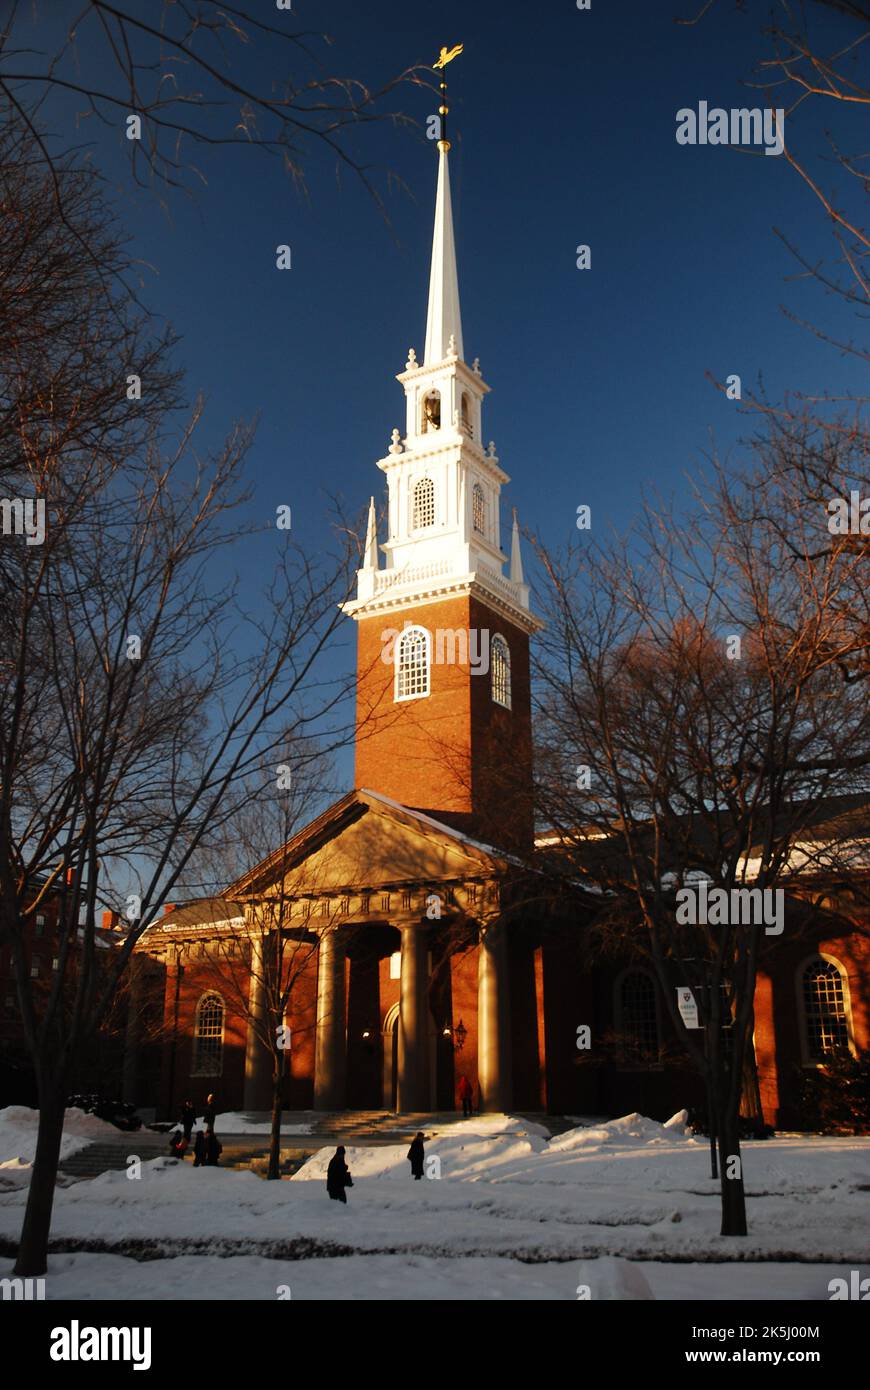 The Harvard University Memorial church stands on Harvard Yard, on the campus of the Ivy League school, in winter Stock Photo